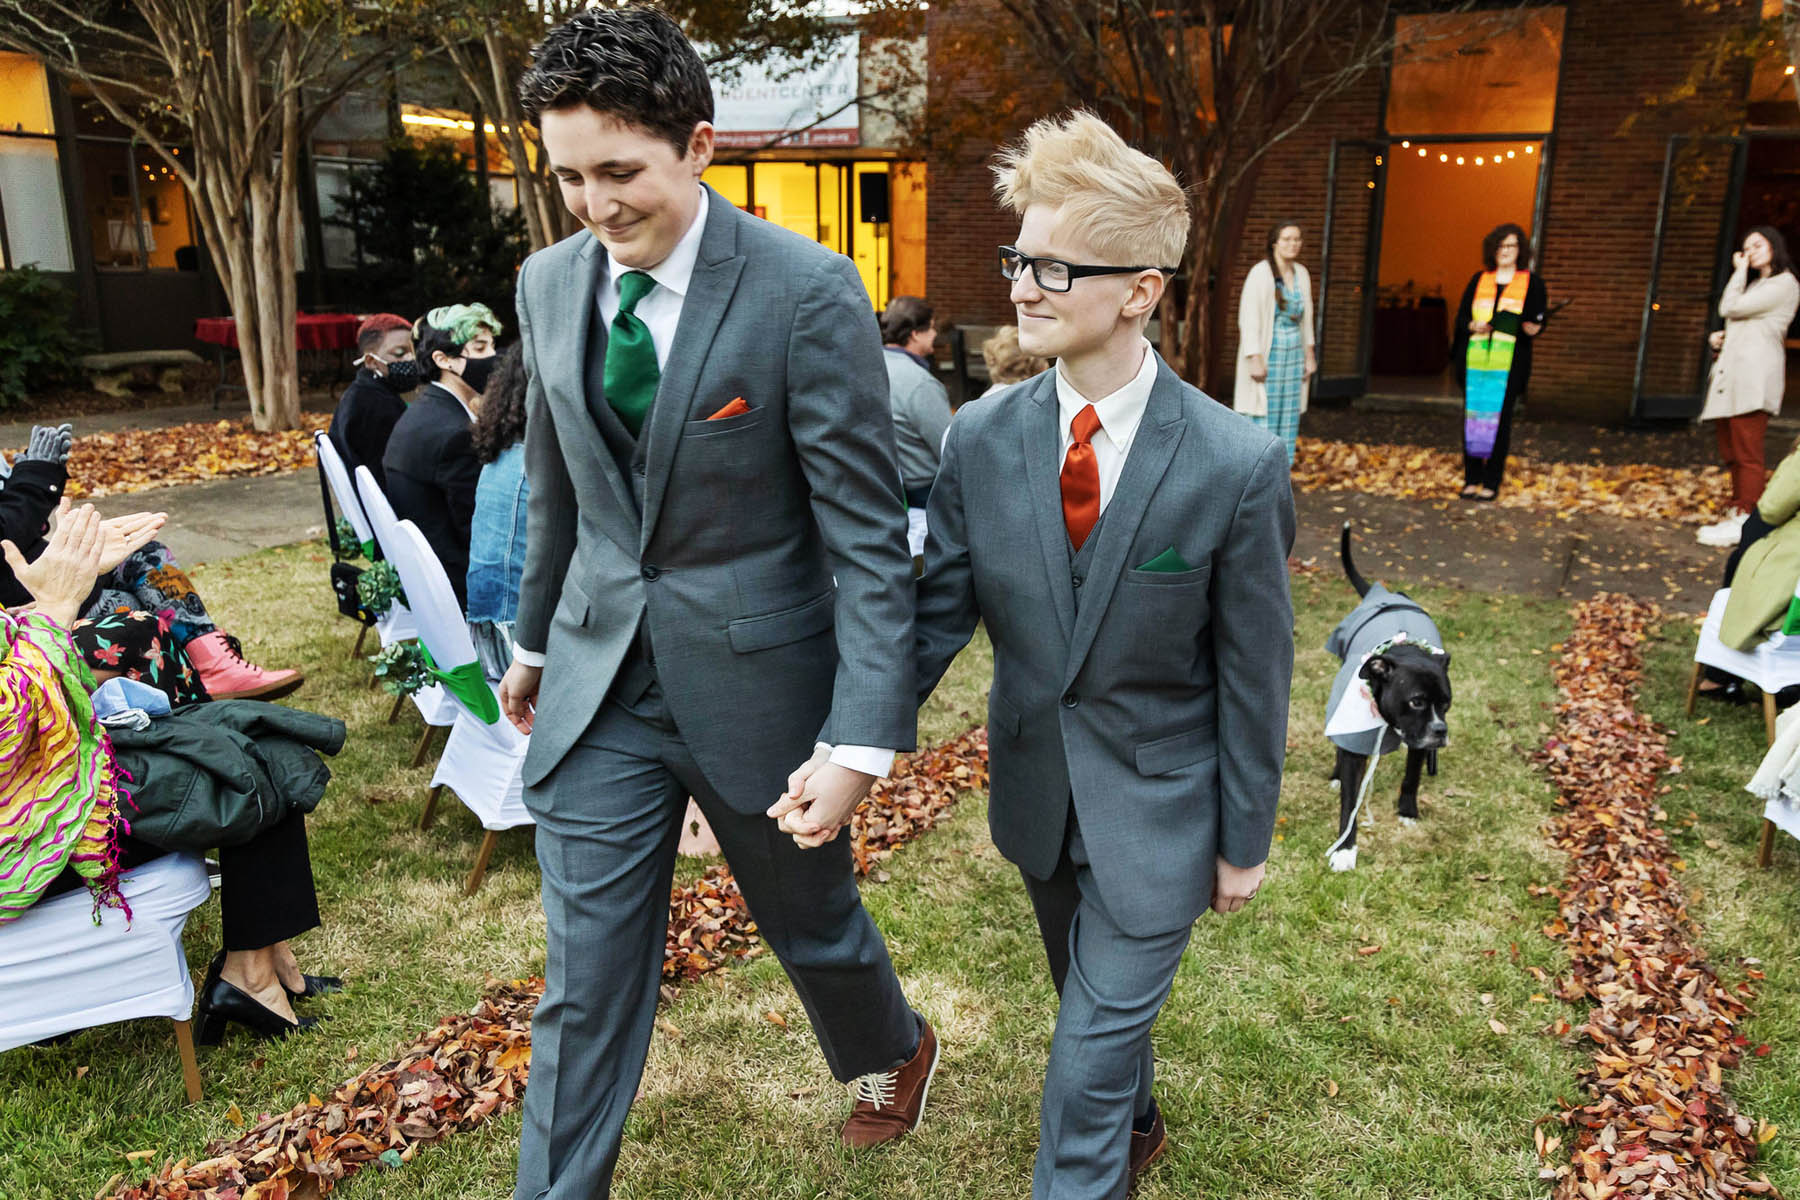 Two white people walk down an aisle lined with fall leaves. Their dog, dressed in a little tuxedo shirt, follows them. 